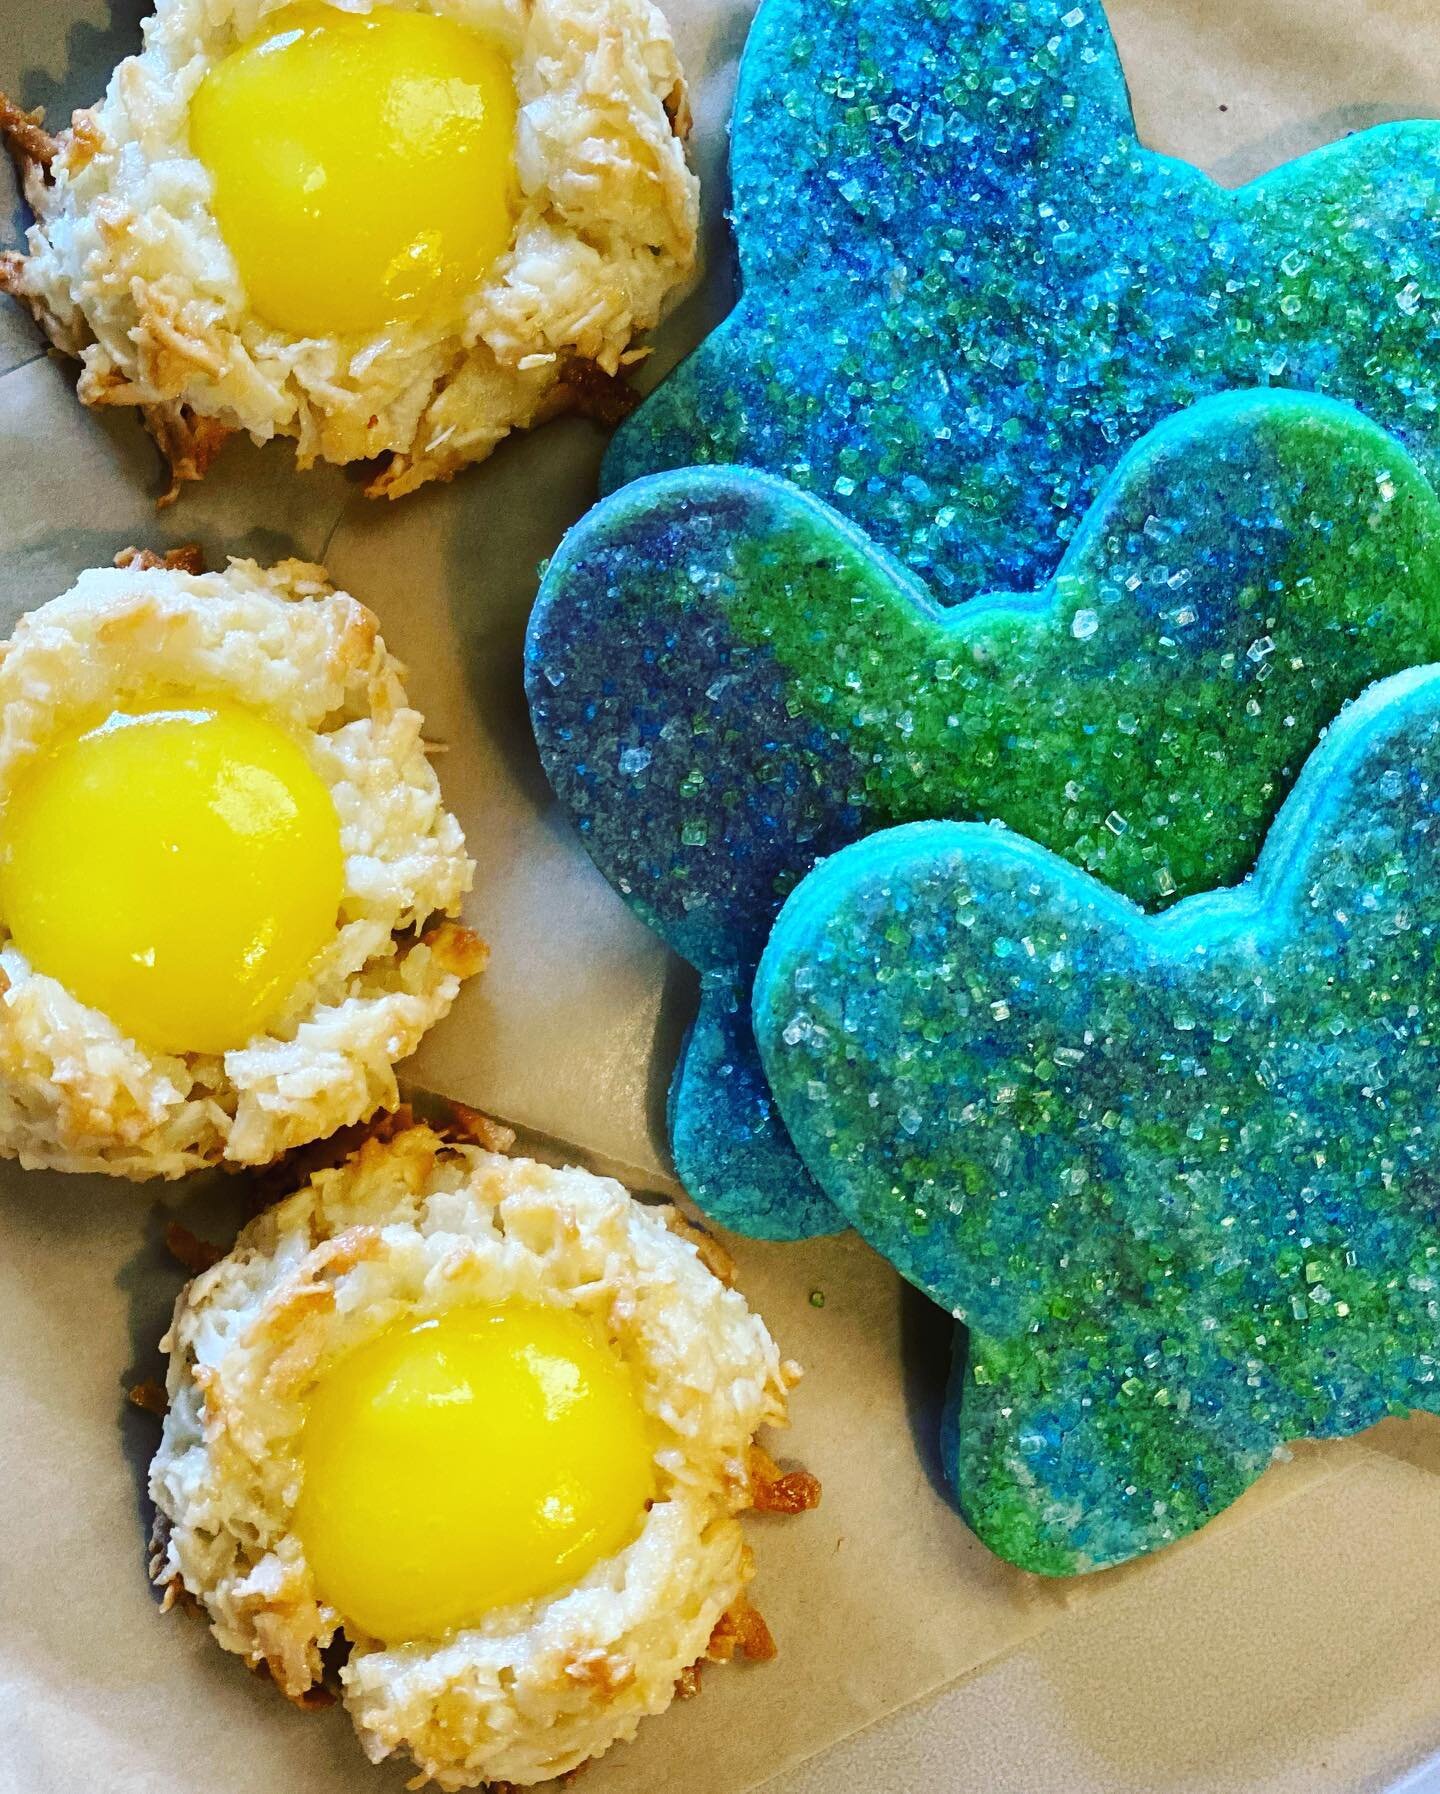 Some festive cookies for Easter weekend? Yes please!
We have a lemon coconut macaroon and a spring butterfly cookie.
Also some new beans on the shelf: 
Papua New Guinea 🇵🇬 
Mexico 🇲🇽 
Ethiopia 🇪🇹 
.
As well as our cinnamon rolls!
.
Open today a